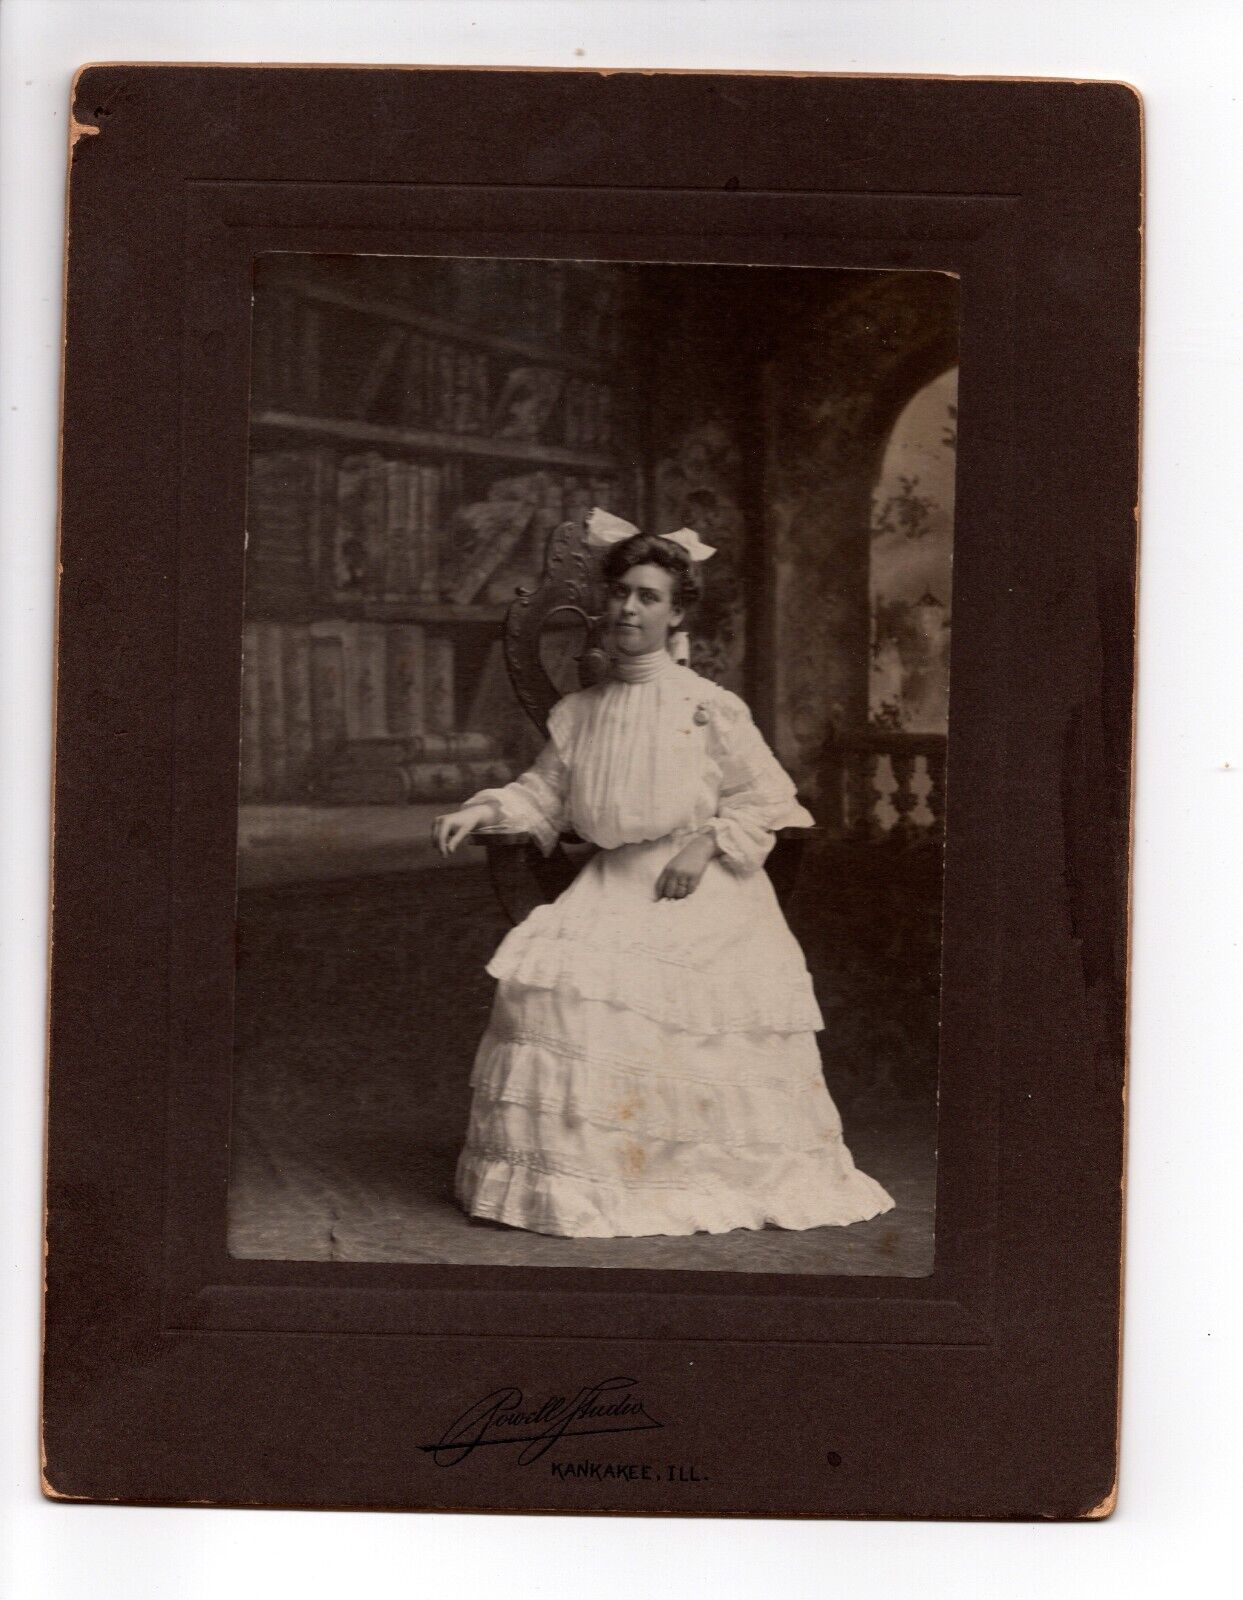 C. 1900s CABINET CARD GORGEOUS YOUNG LADY IN BIG WHITE DRESS KANKAKEE ILLINOIS